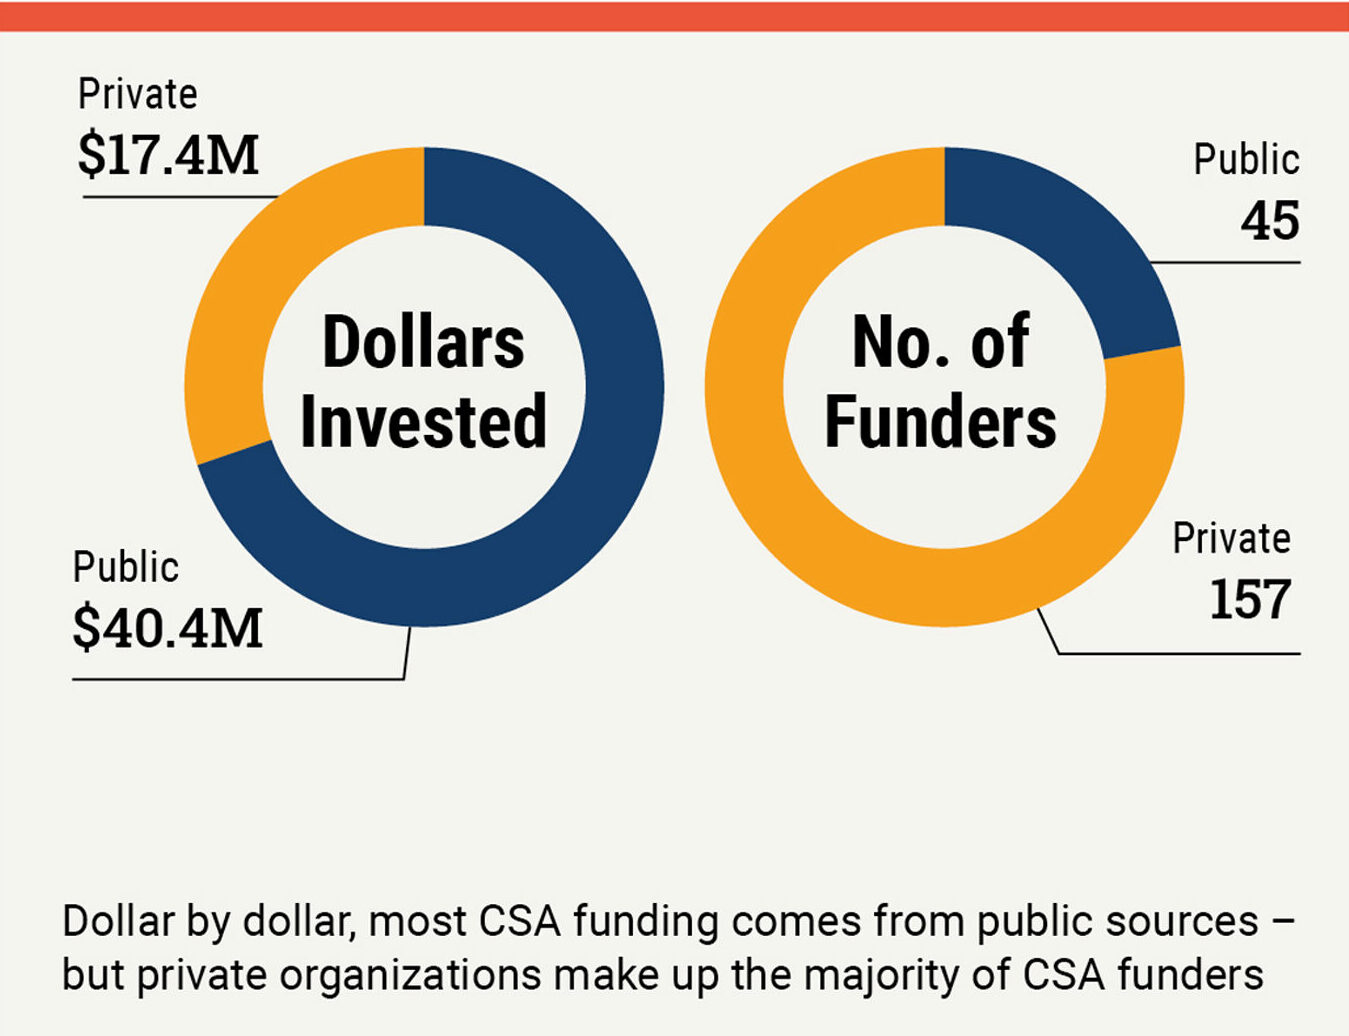 Dollar by dollar, most CSA funding comes from public sources - but private orgs make up the majority of CSA funders